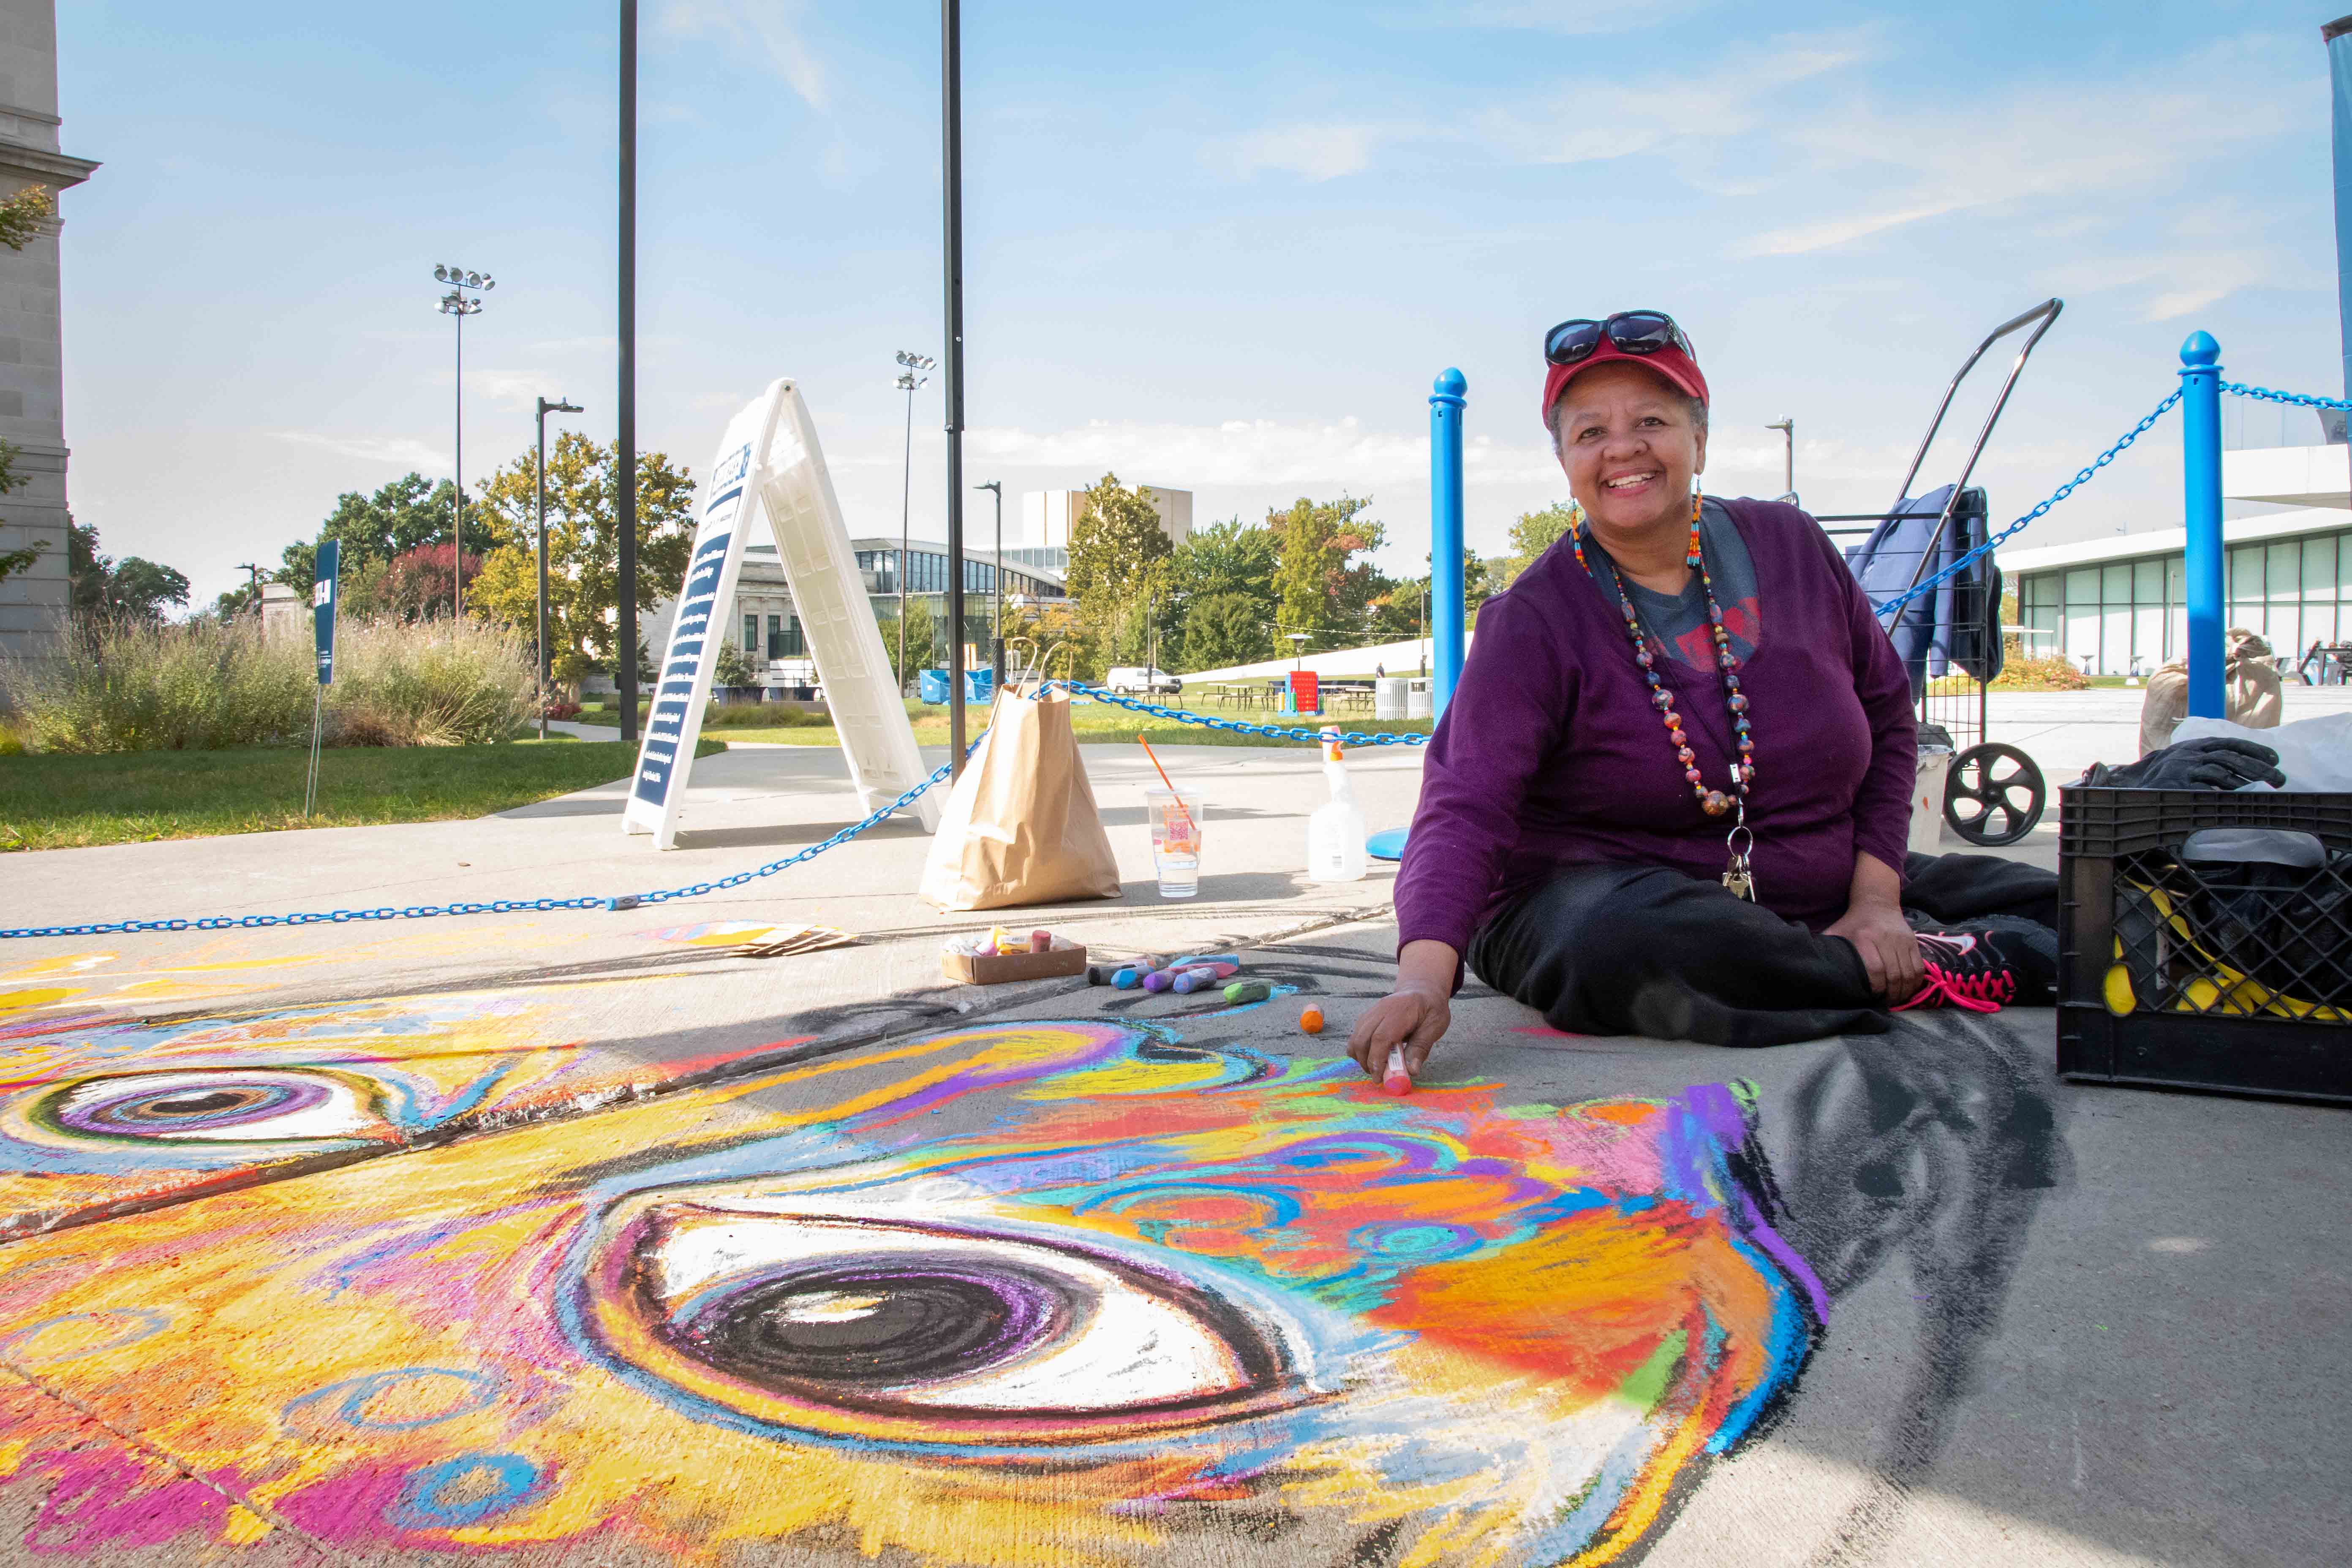 Anna sits on the ground toward the bottom of her mural with a piece of chalk in-hand, smiling at the camera. She's wearing a red hat, purple sweater and the sky behind her is blue. The portrait is a mixture of many bright colors.